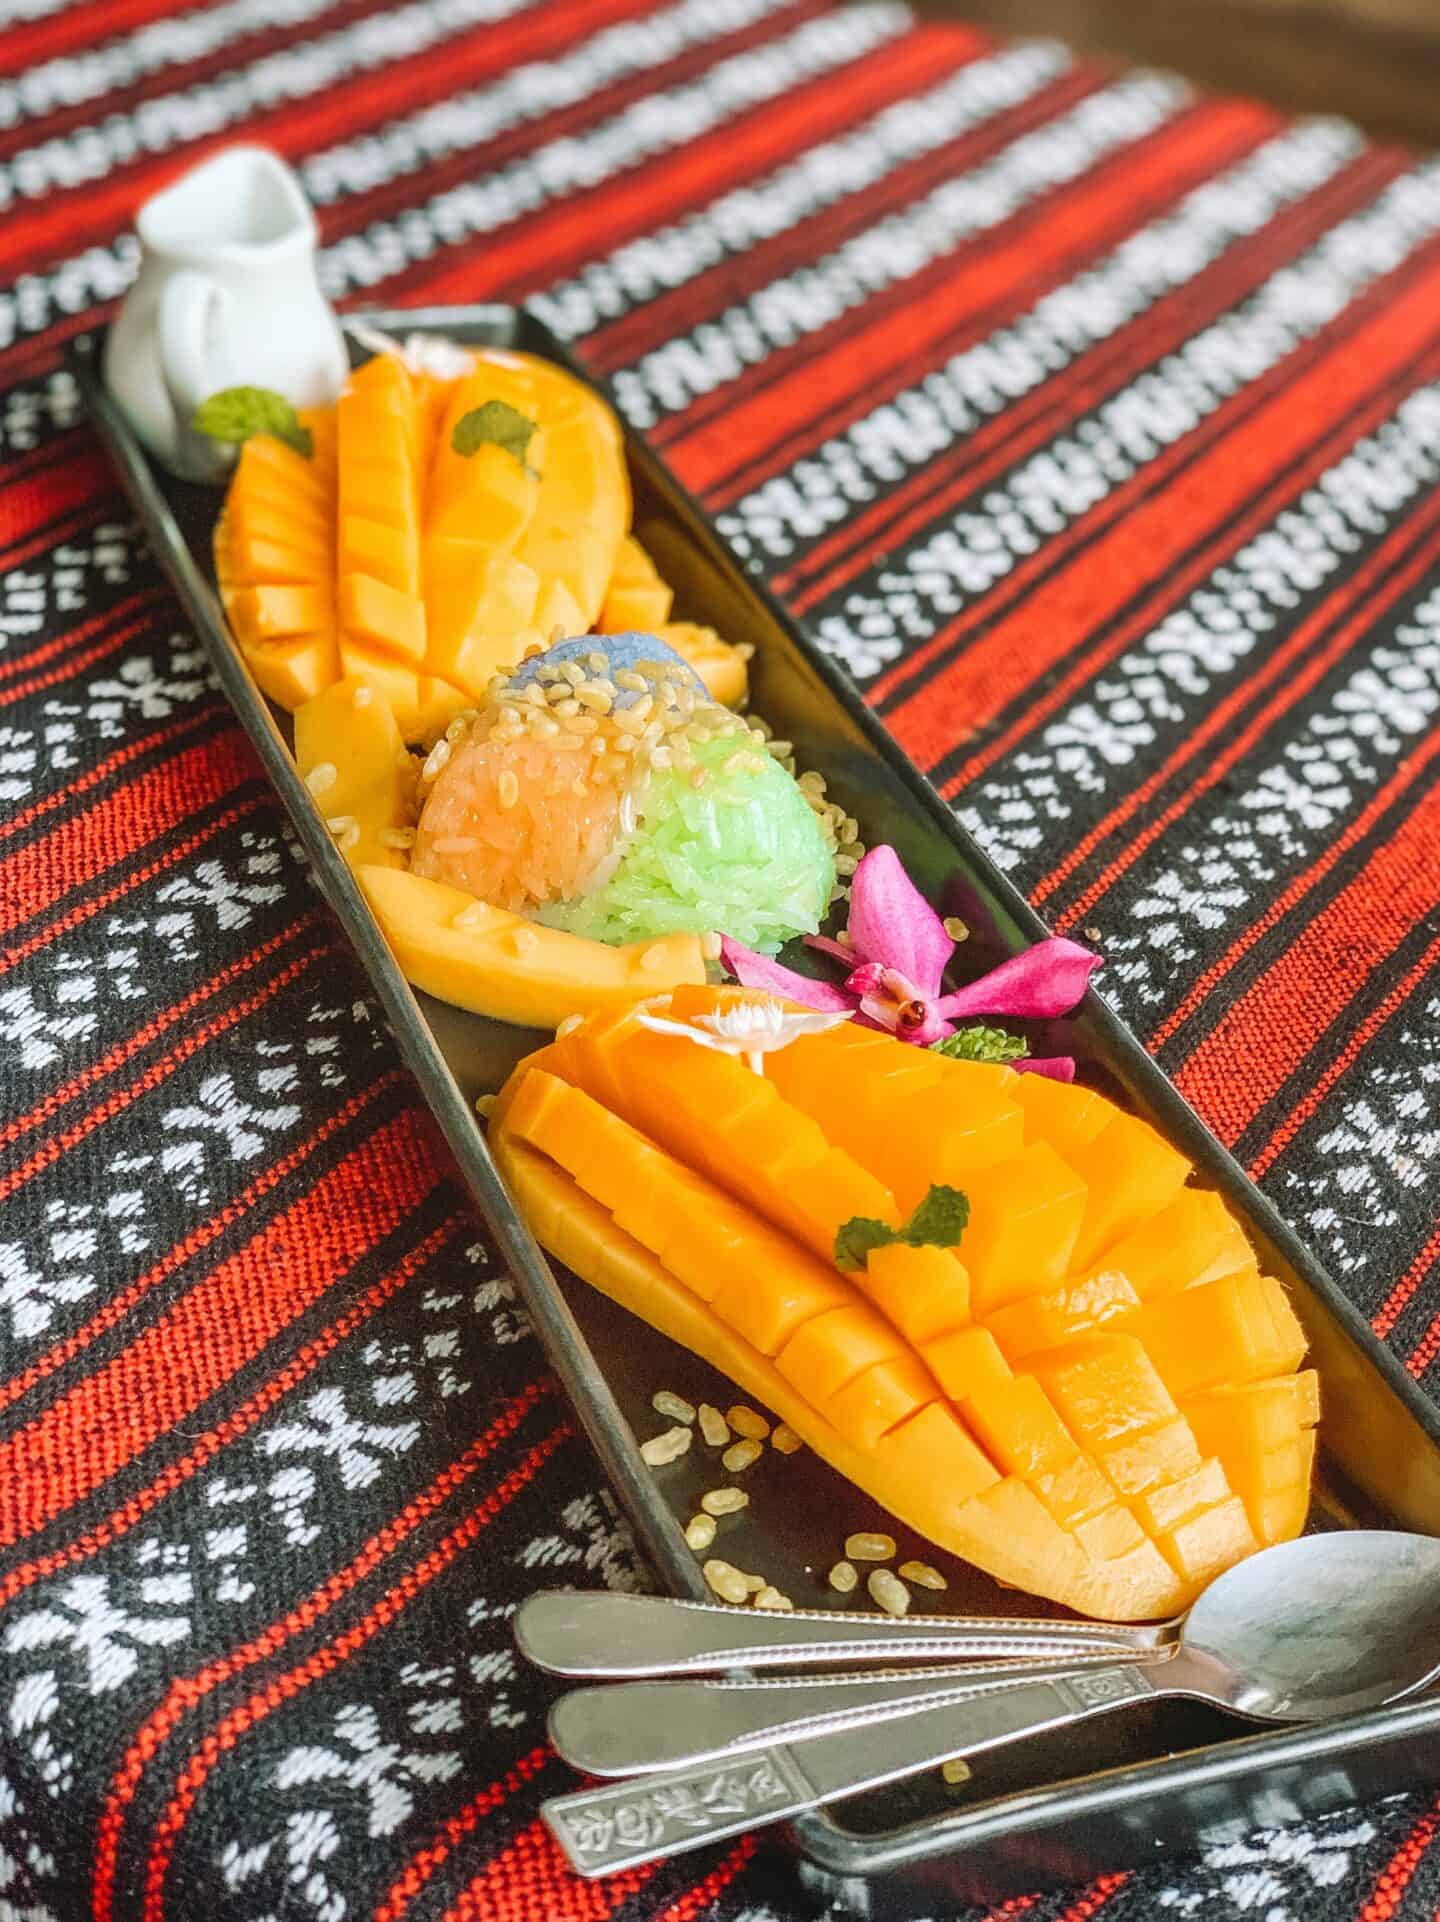 Mango sticky rice from Tikky Cafe in Chiang Mai Thailand